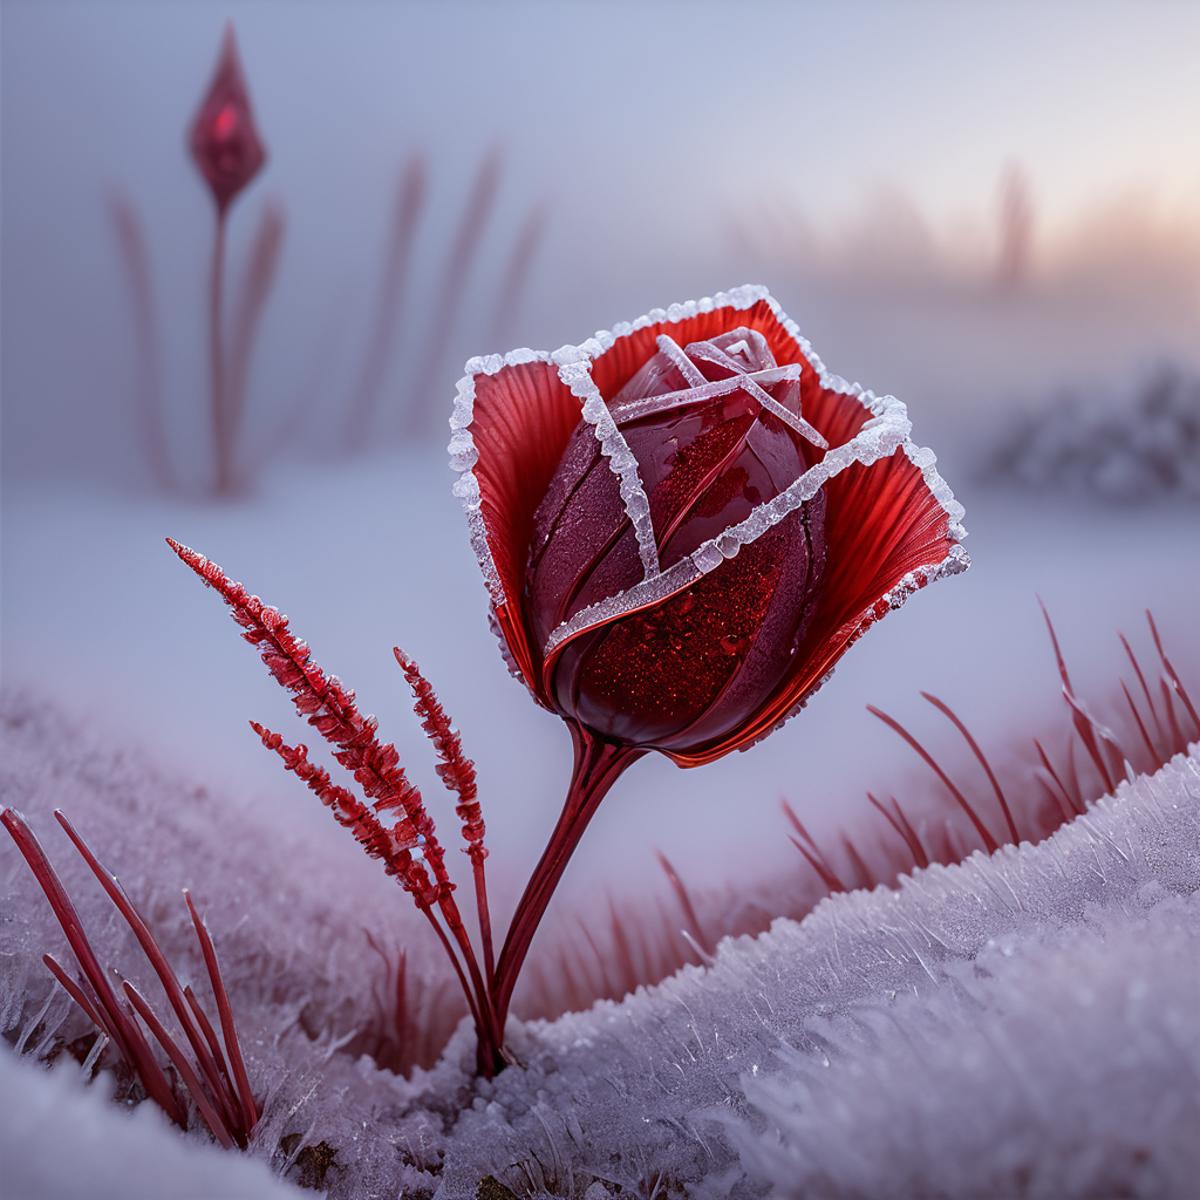 An artistic image of a red rose in snow, surrounded by red and purple plants, with a frosty winter background.